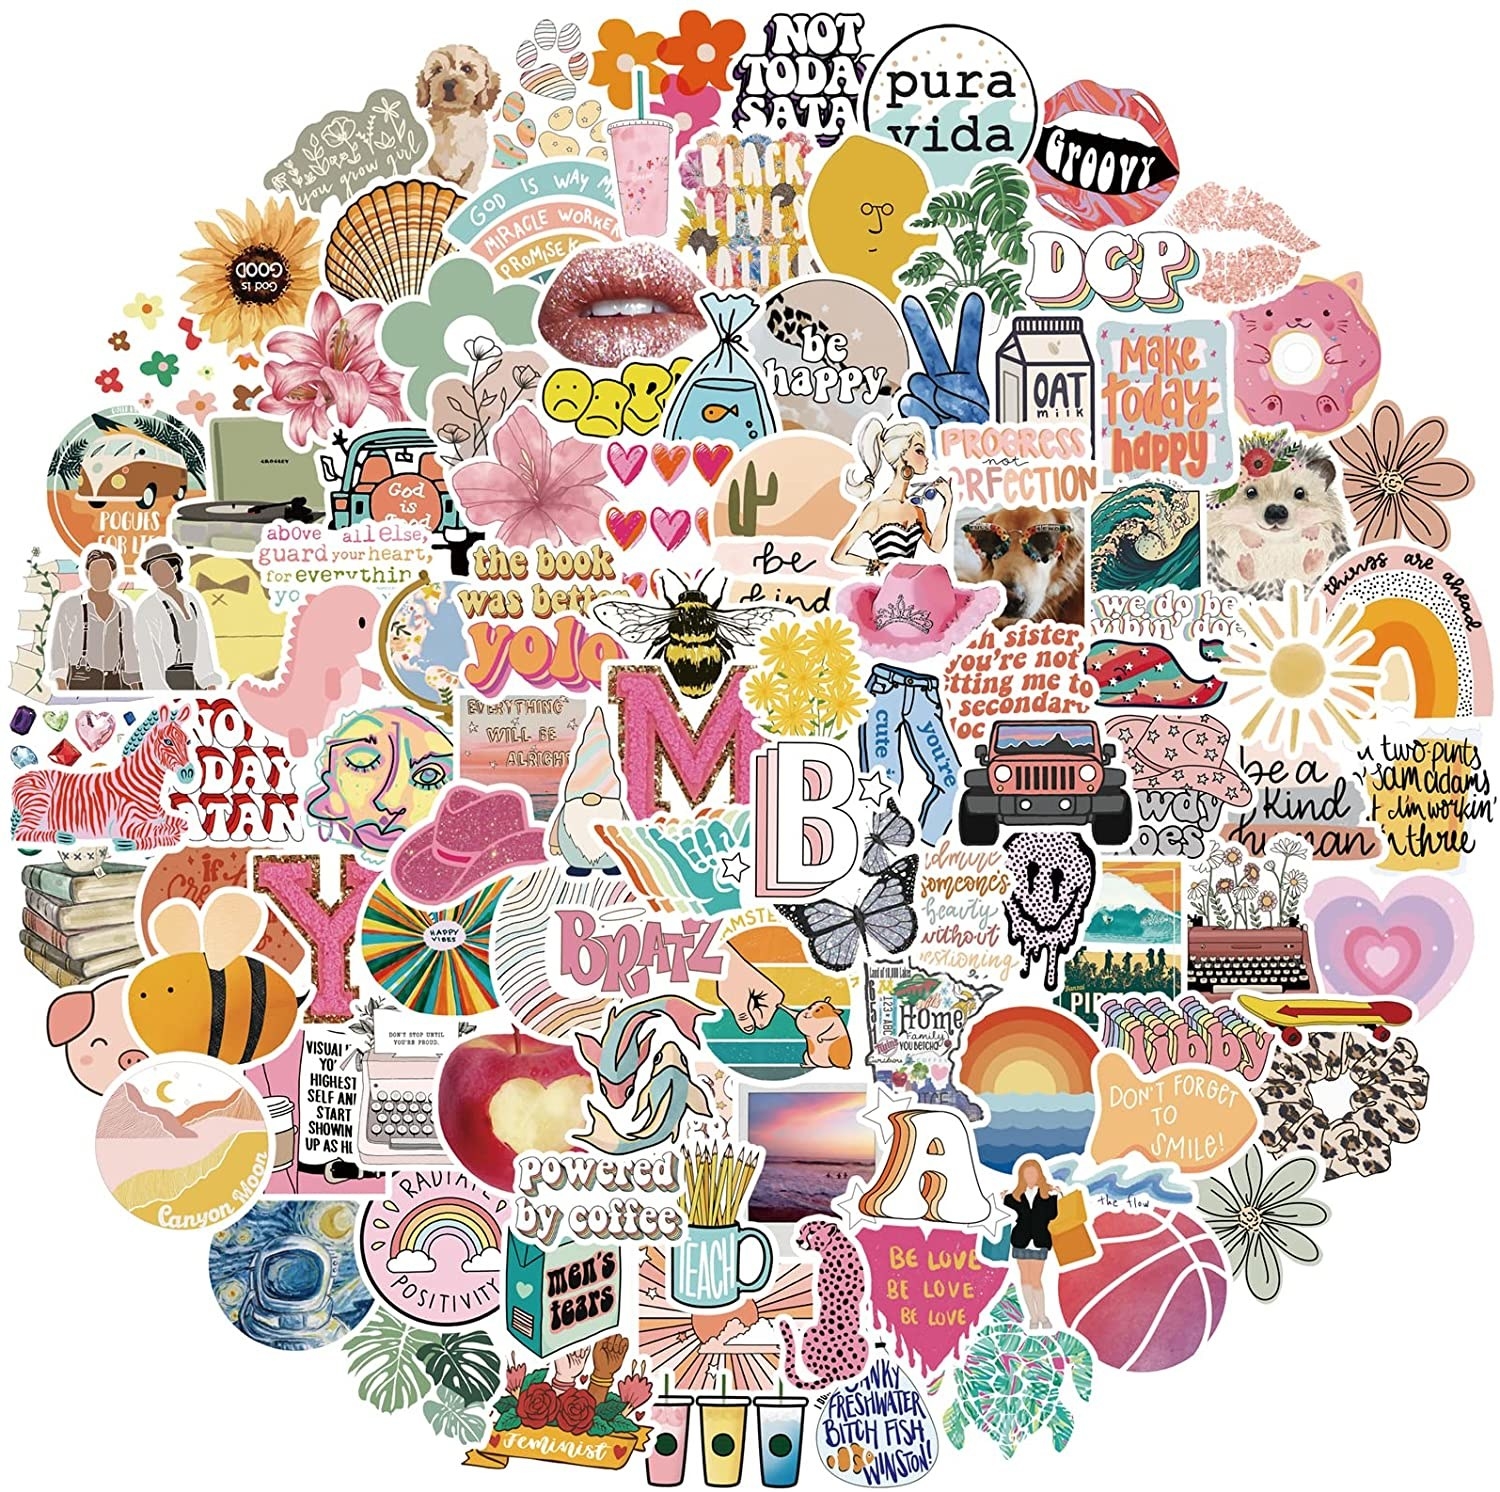 All of the stickers arranged in a big circle on a plain background